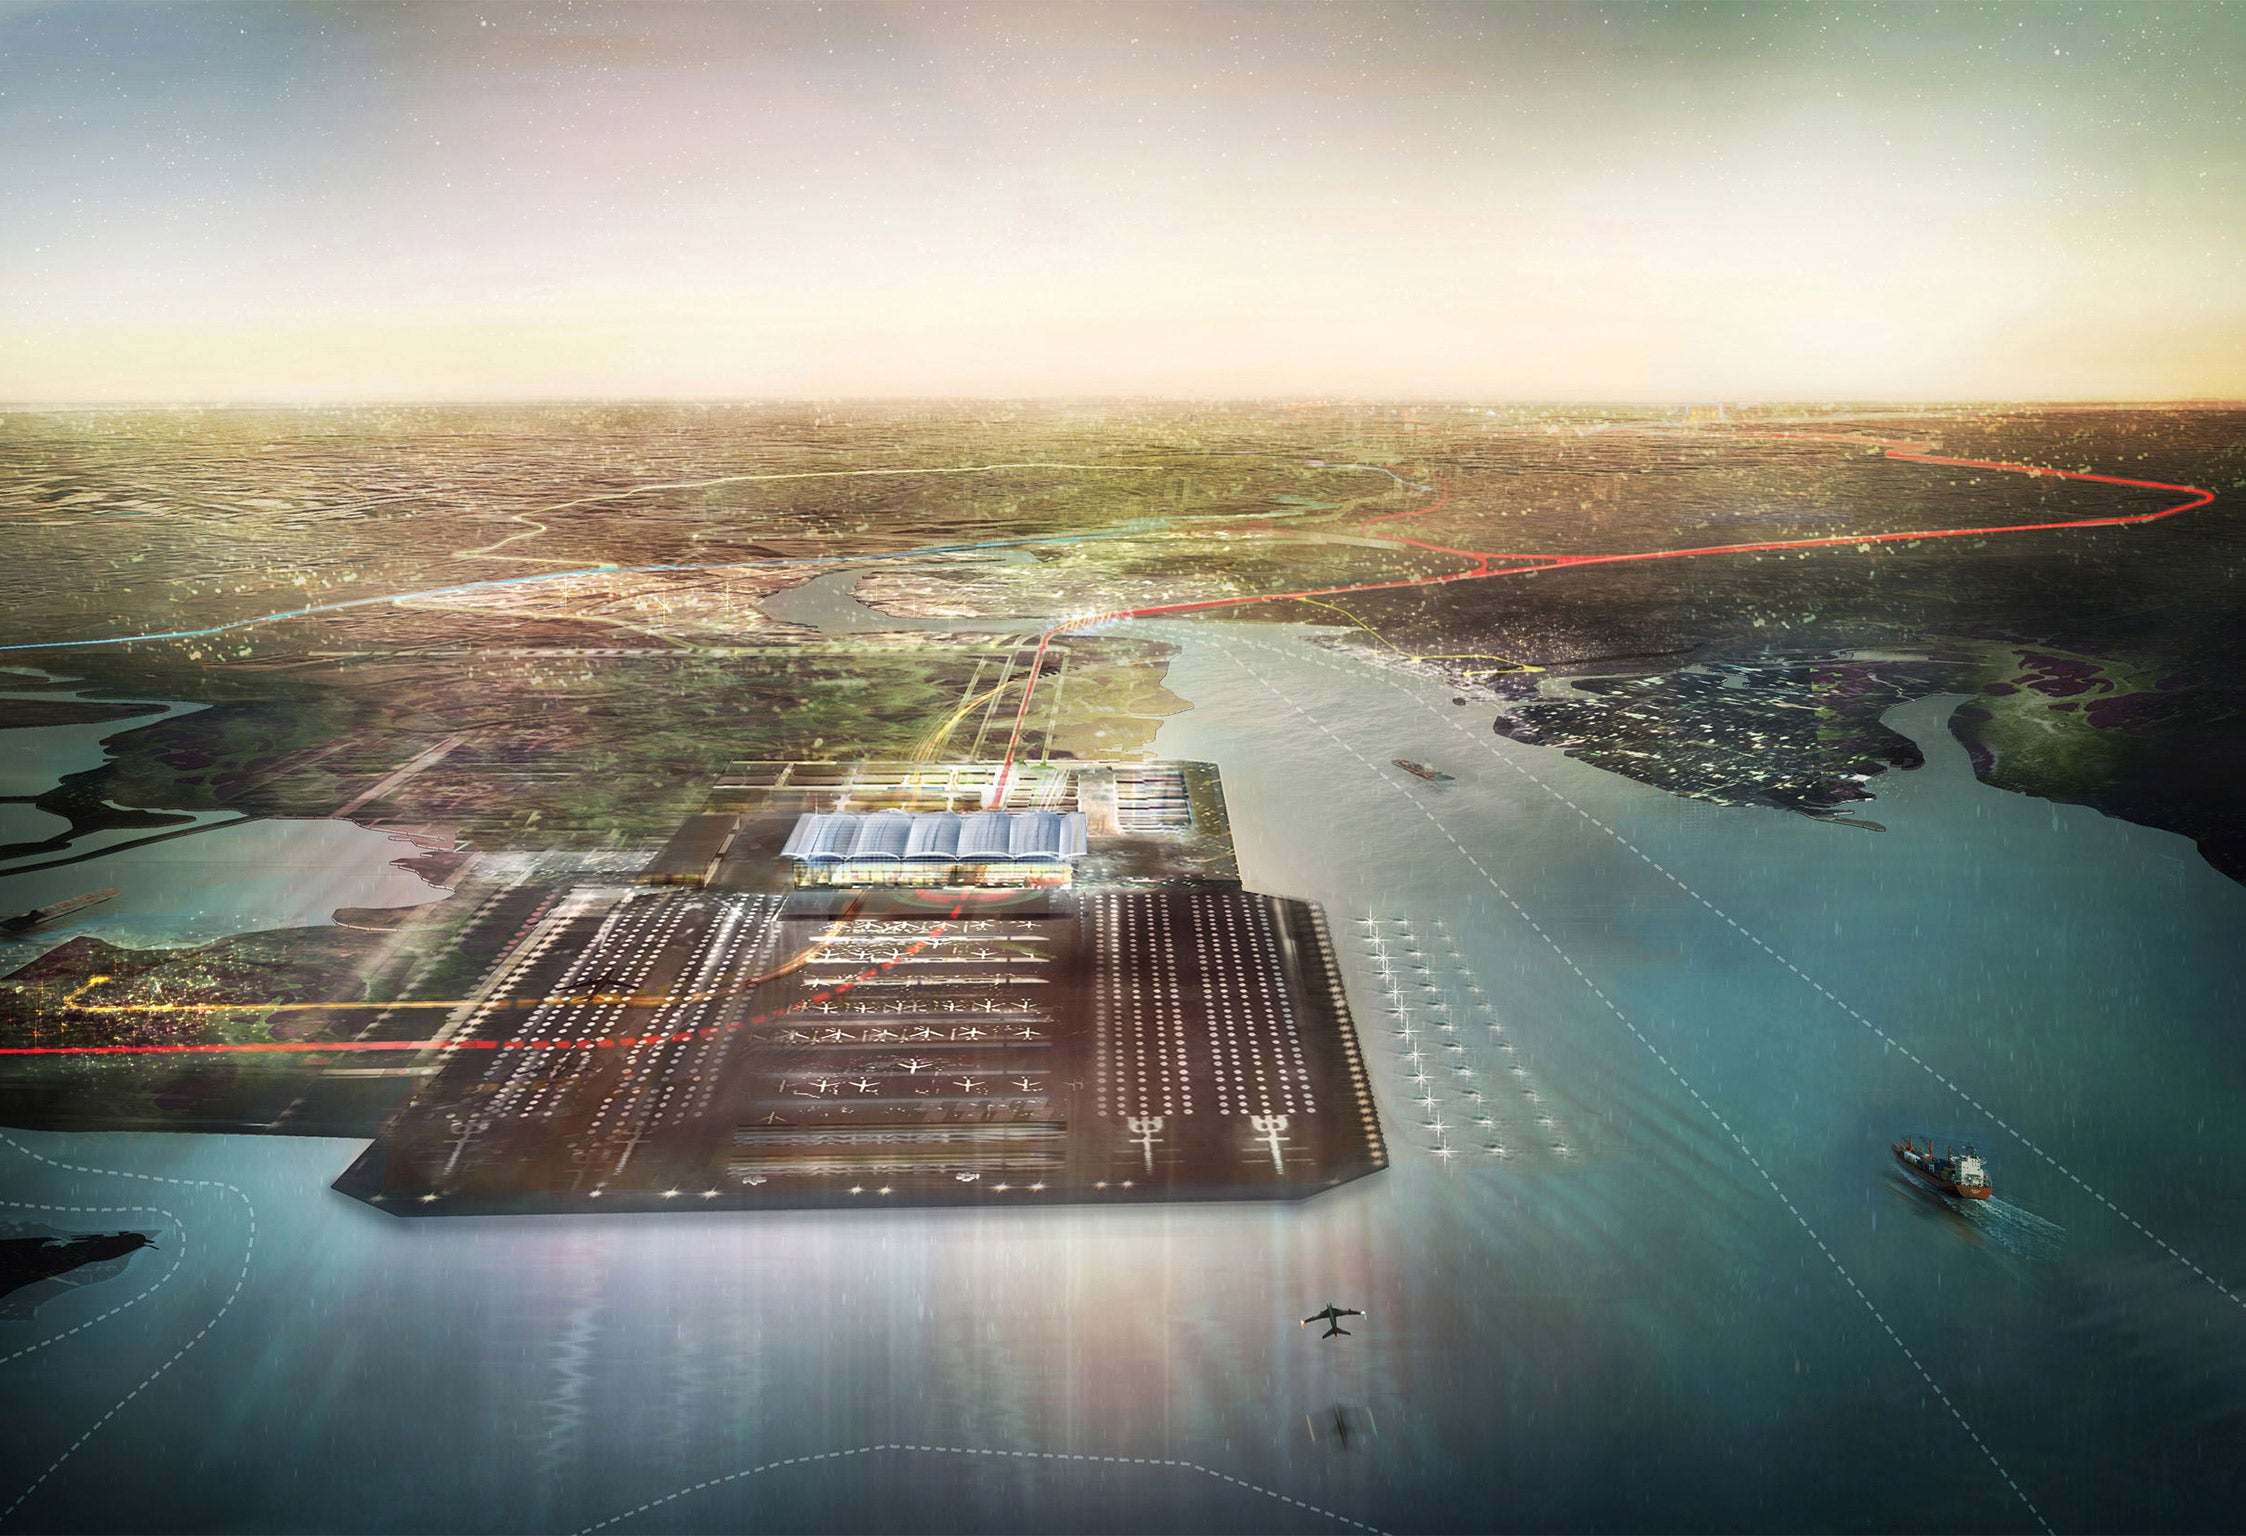 An artist’s impression of how a four-runway airport at the Thames Estuary may look